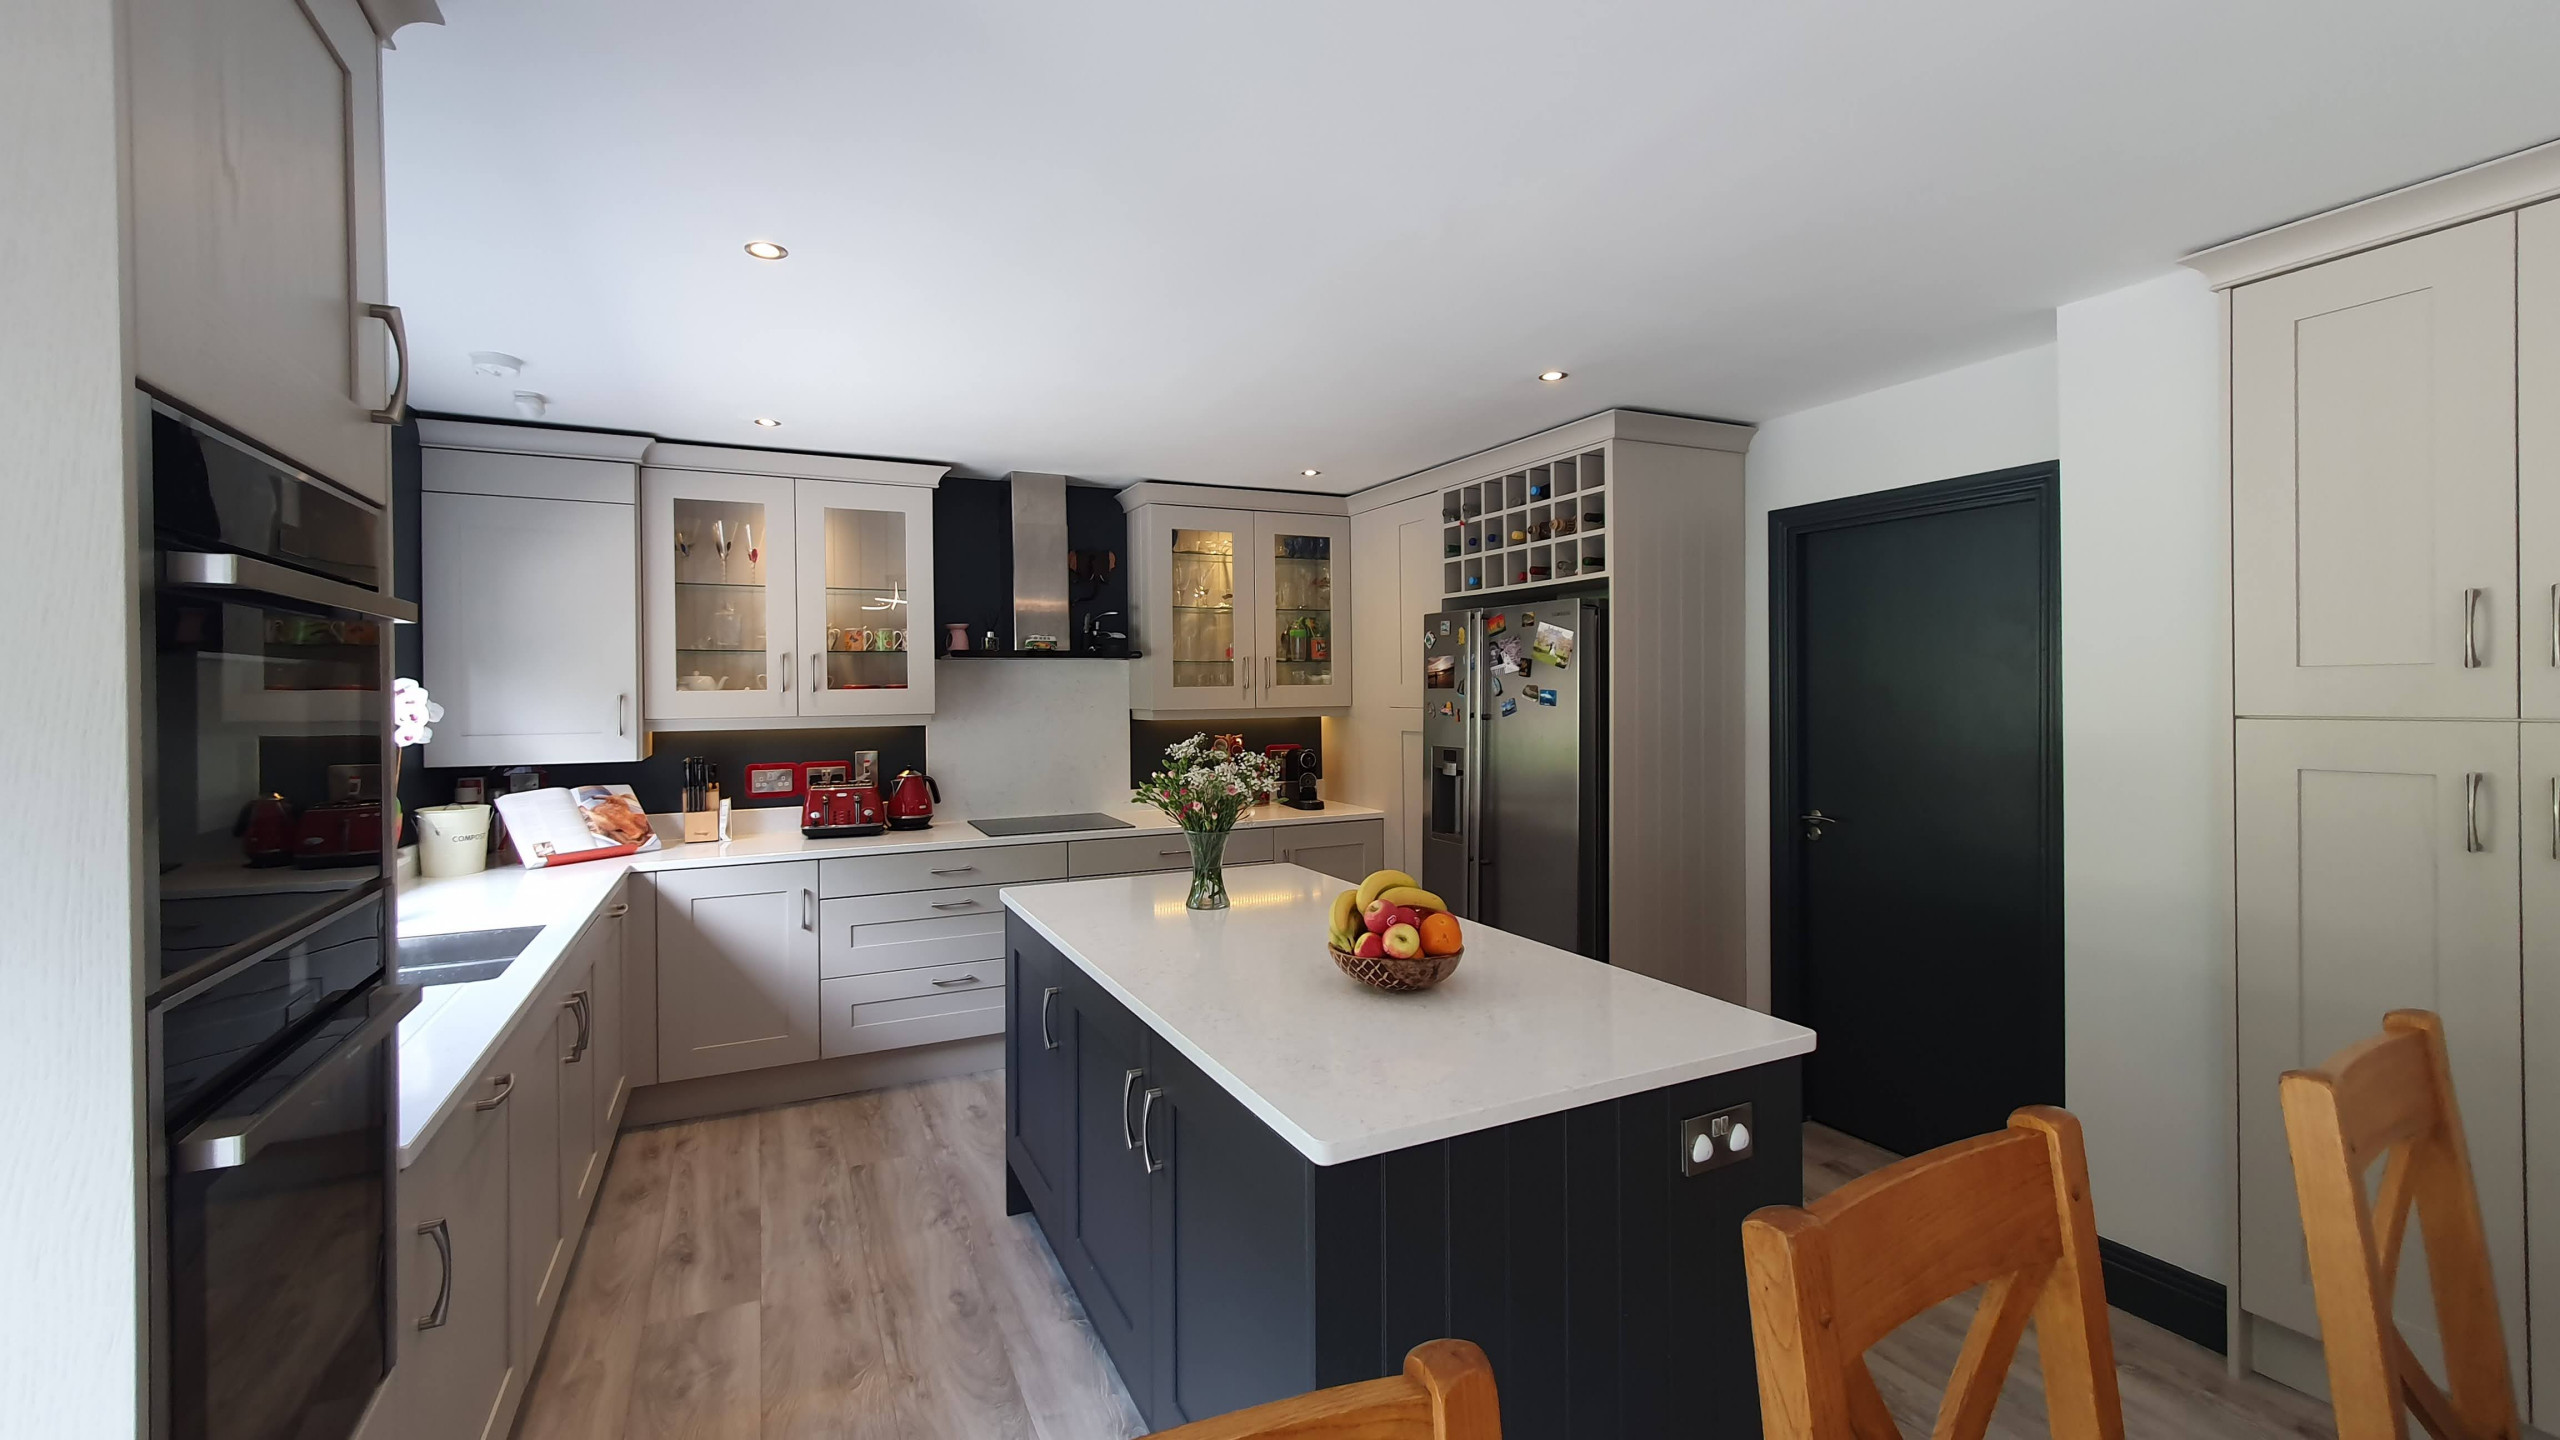 The kitchen and TV room across the back of the property were combined to make one open plan living space. It now contains a large kitchen, dining and sitting area. The space is south east facing and g